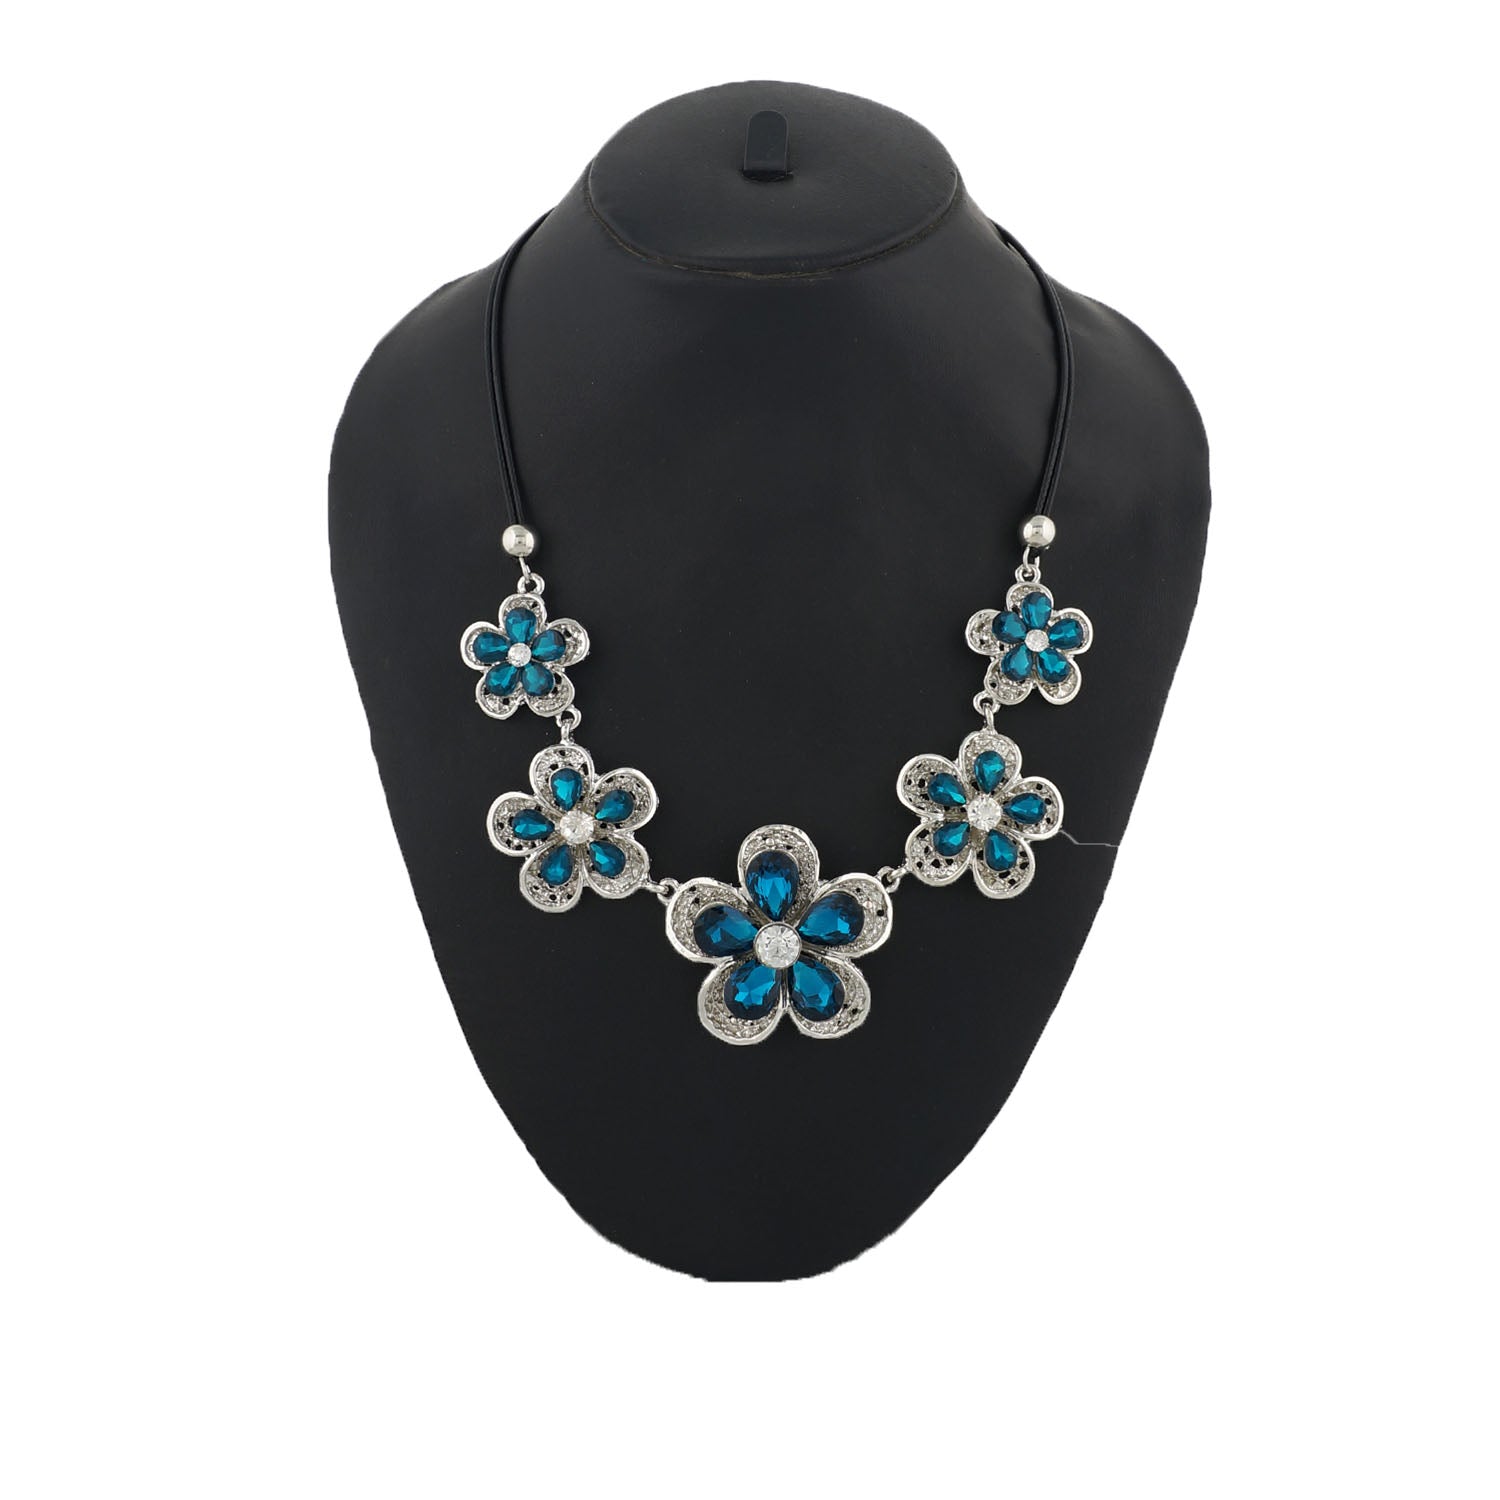  Silver and Blue Coloured stones studded Floral  Necklace For Girls and Women